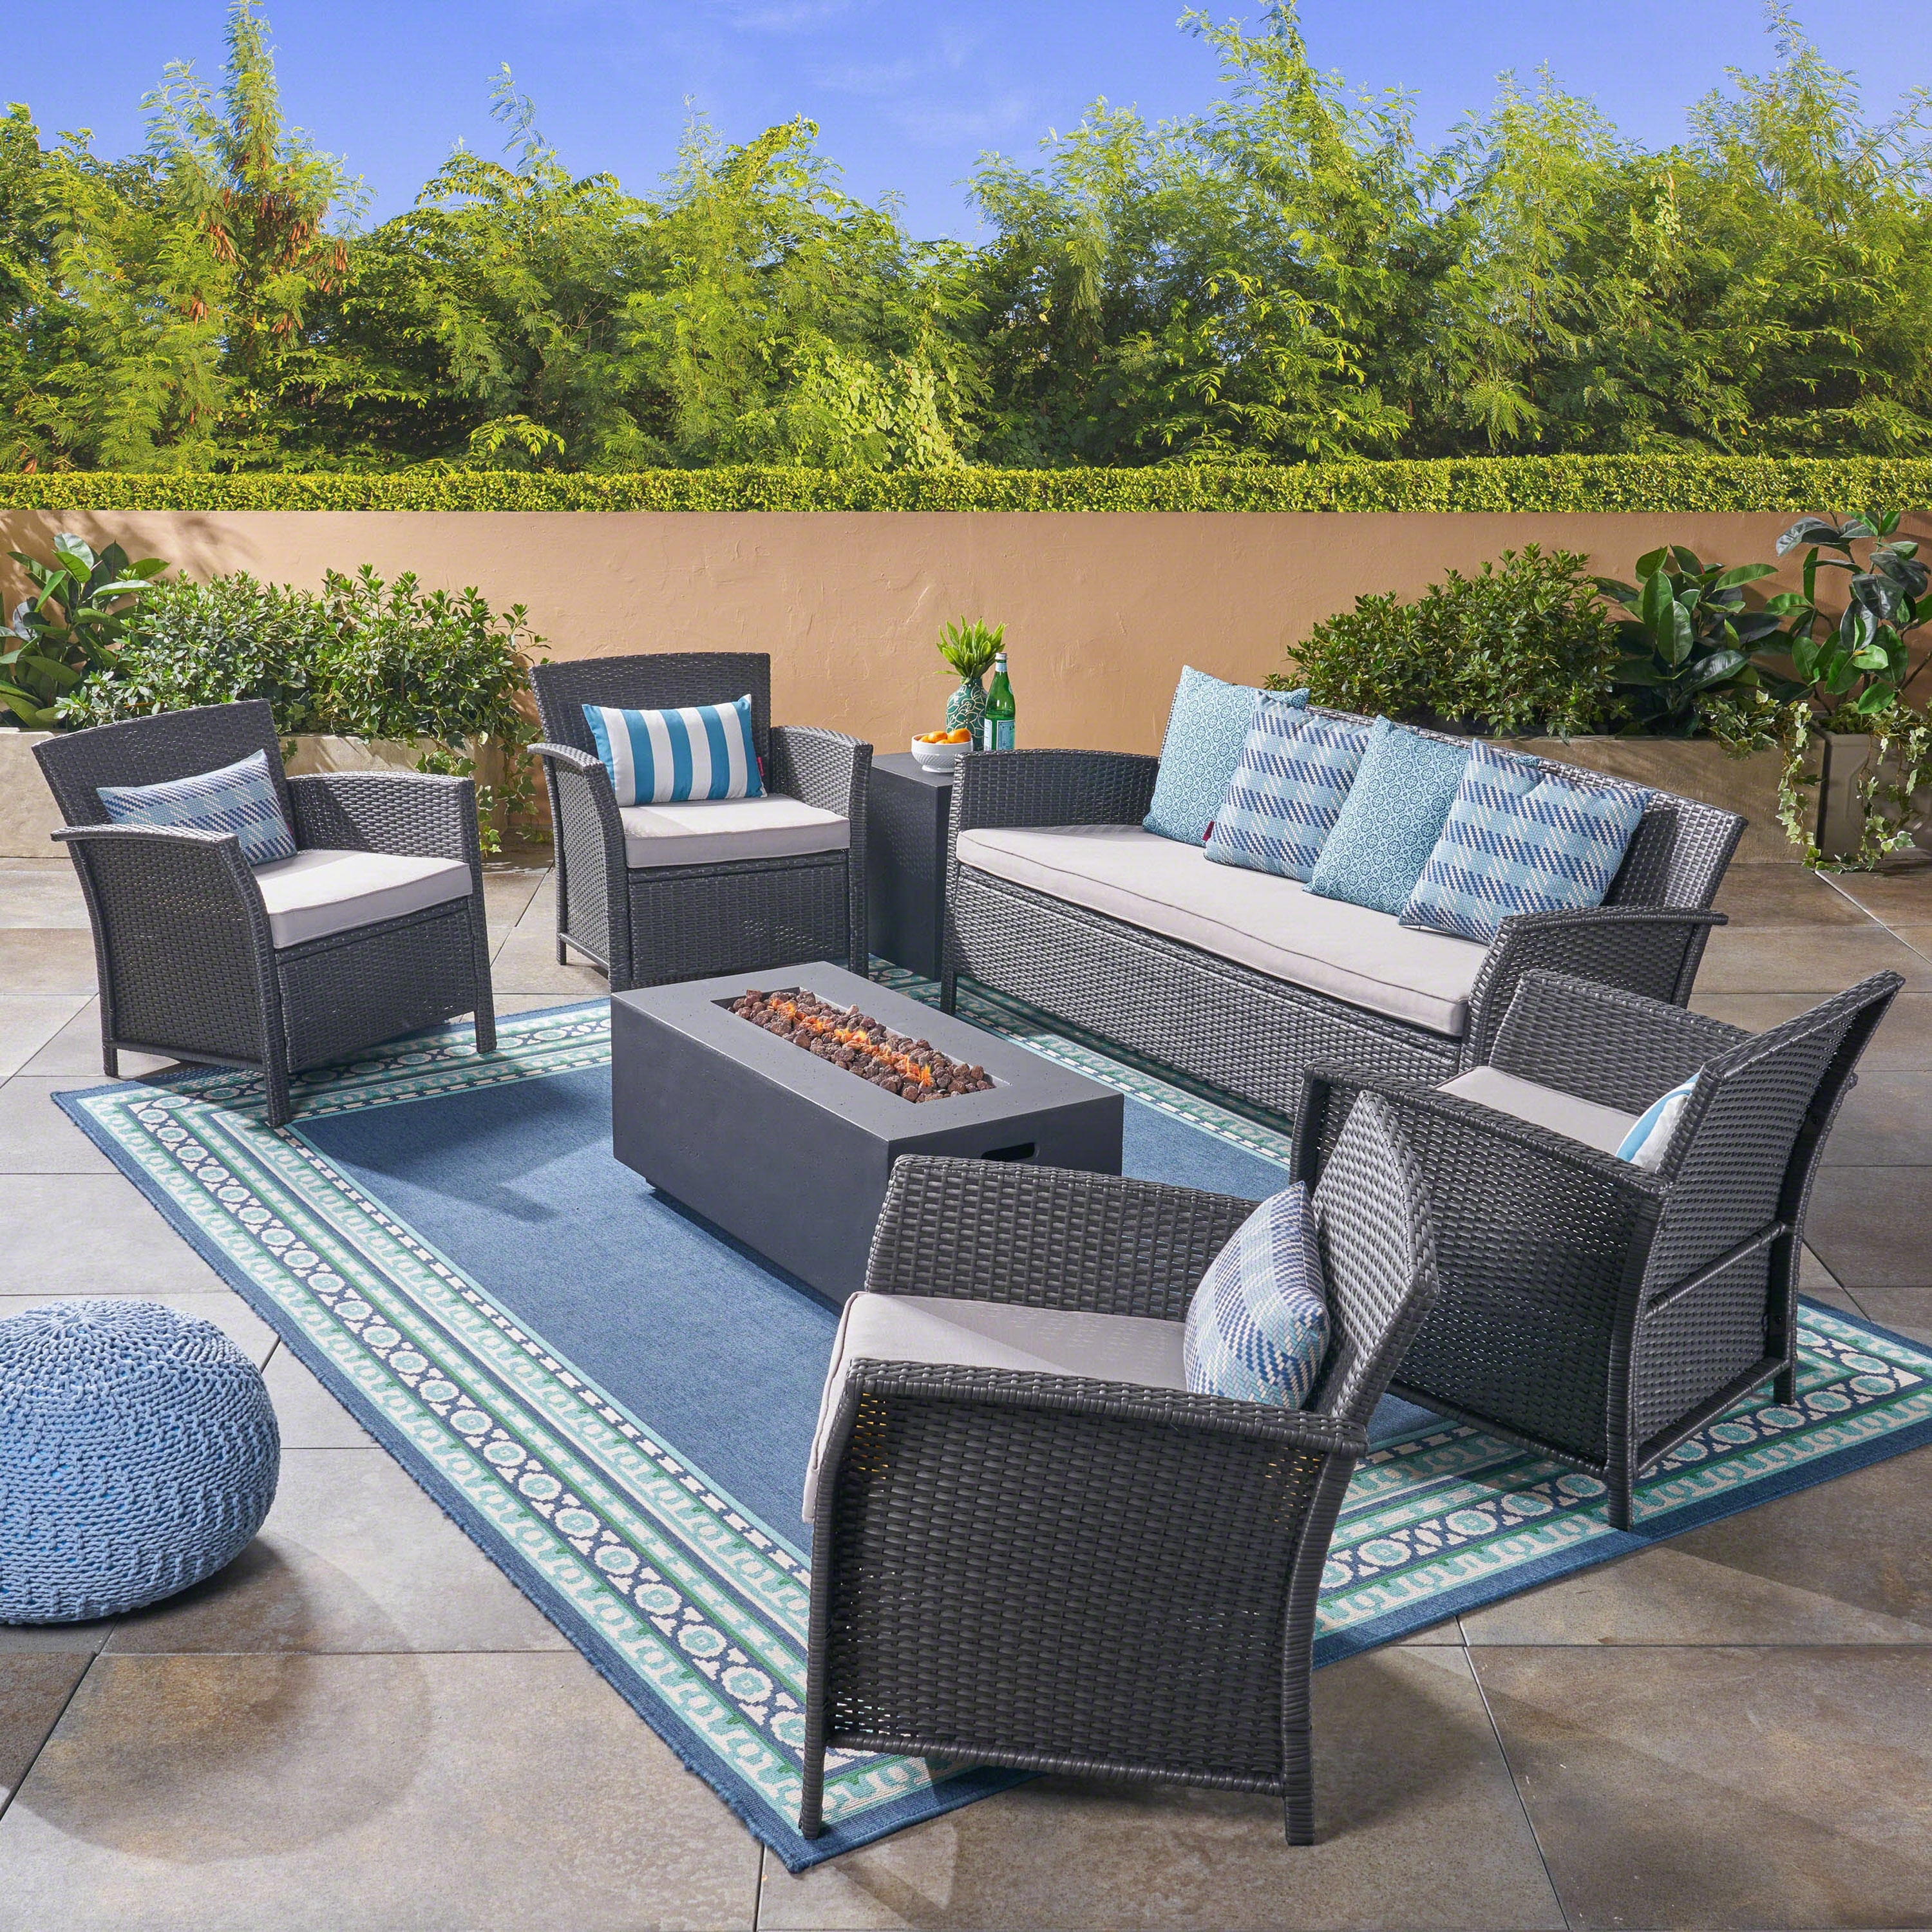 St. Lucia Outdoor 7 Seater Wicker Chat Set With Fire Pit By Christopher Knight Home